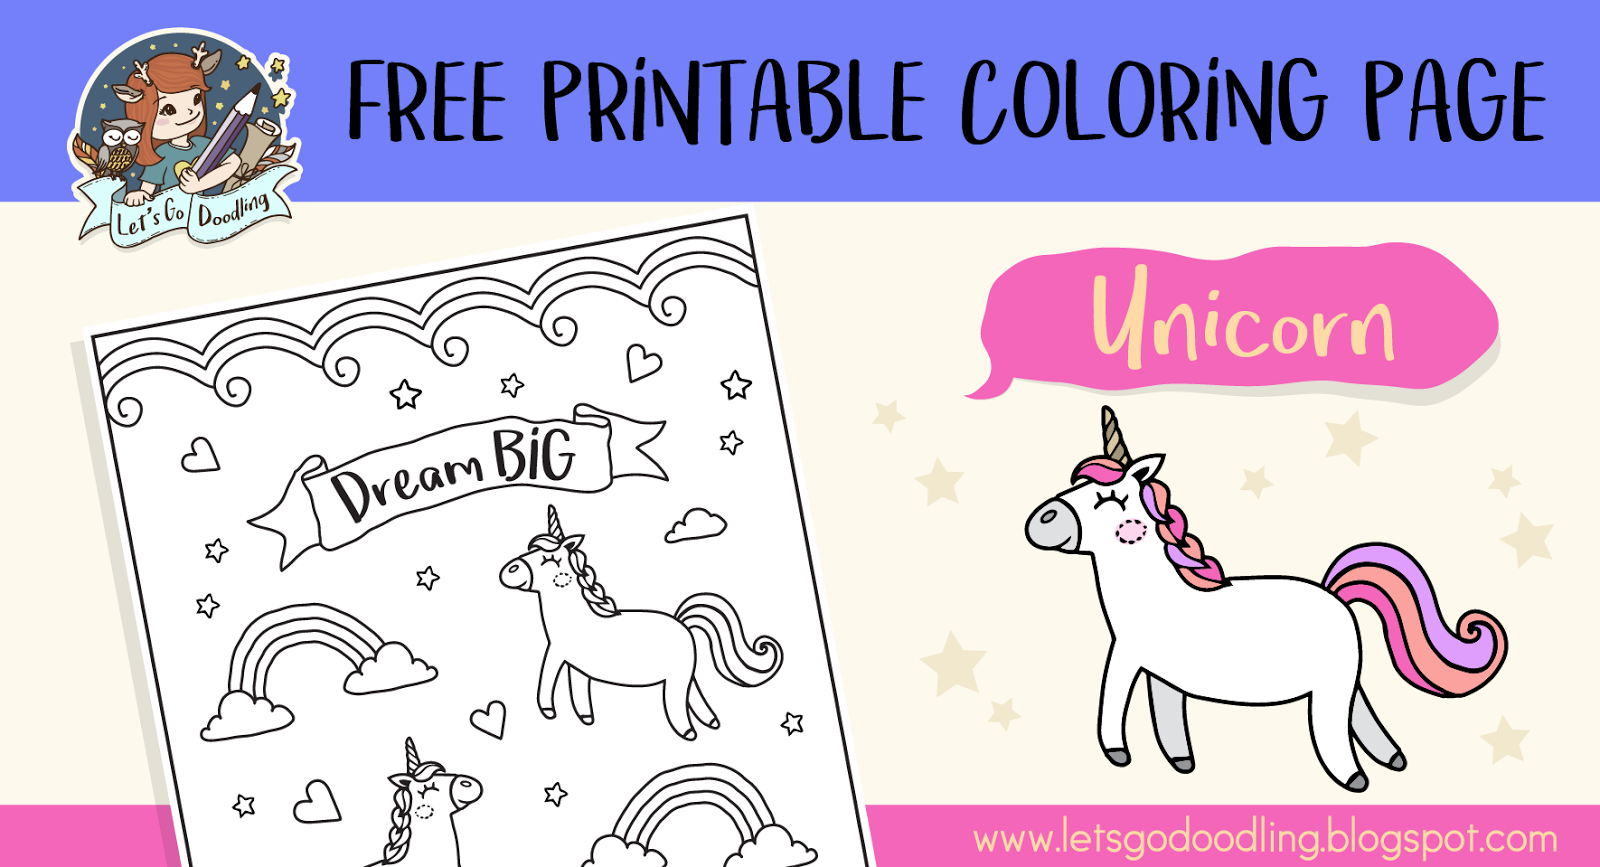 How To Draw Unicorn - Easy Step By Step Drawing Tutorial